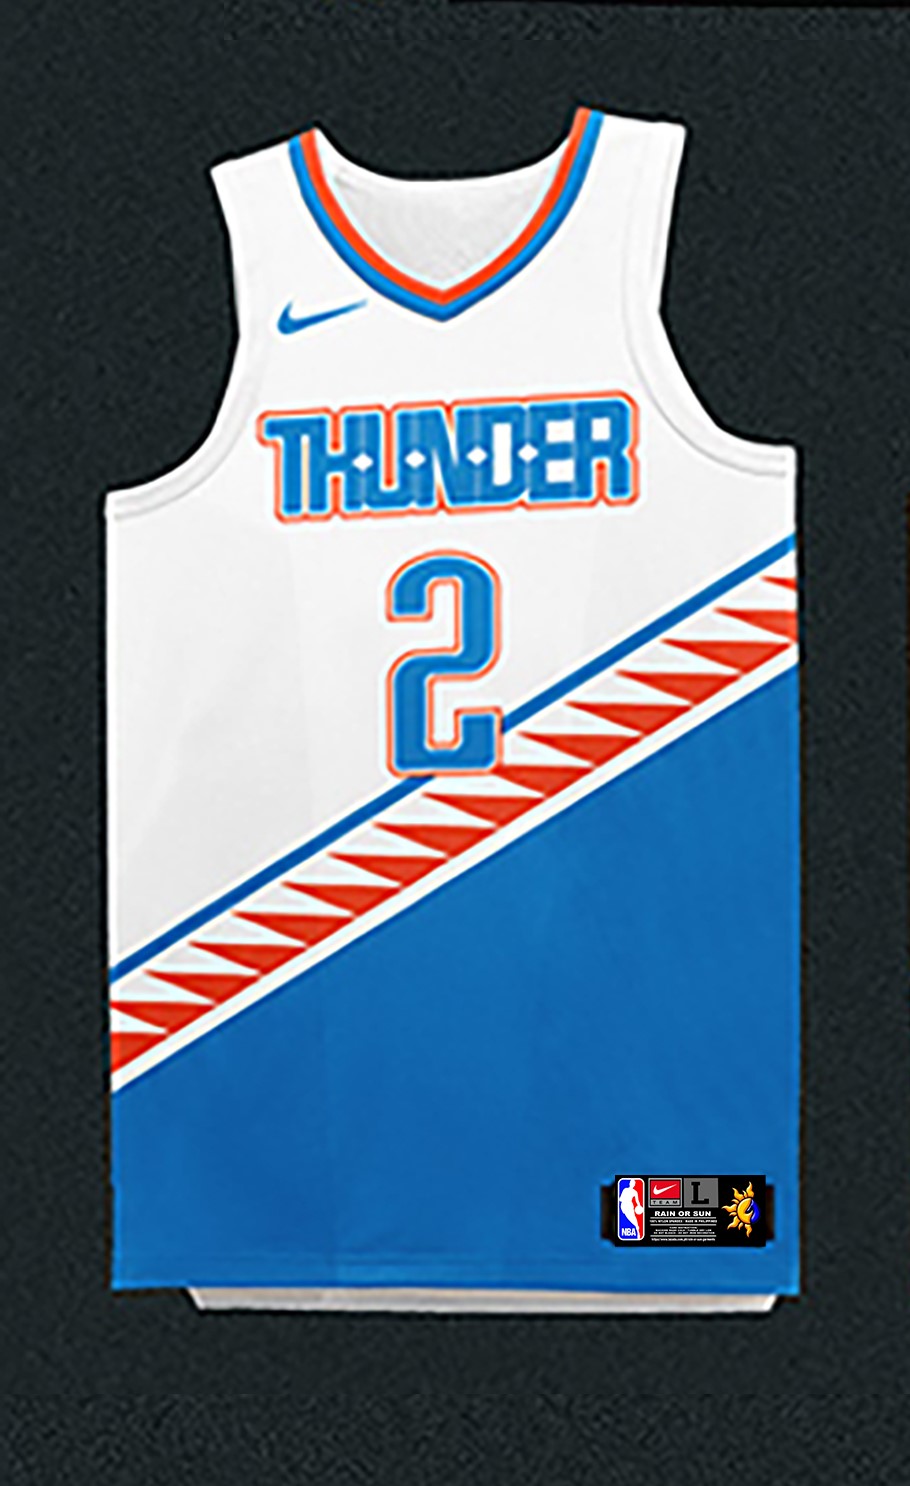 OKC THUNDER JERSEY FREE CUSTOMIZE NAME AND NUMBER ONLY full sublimation  high quality fabrics/ jersey